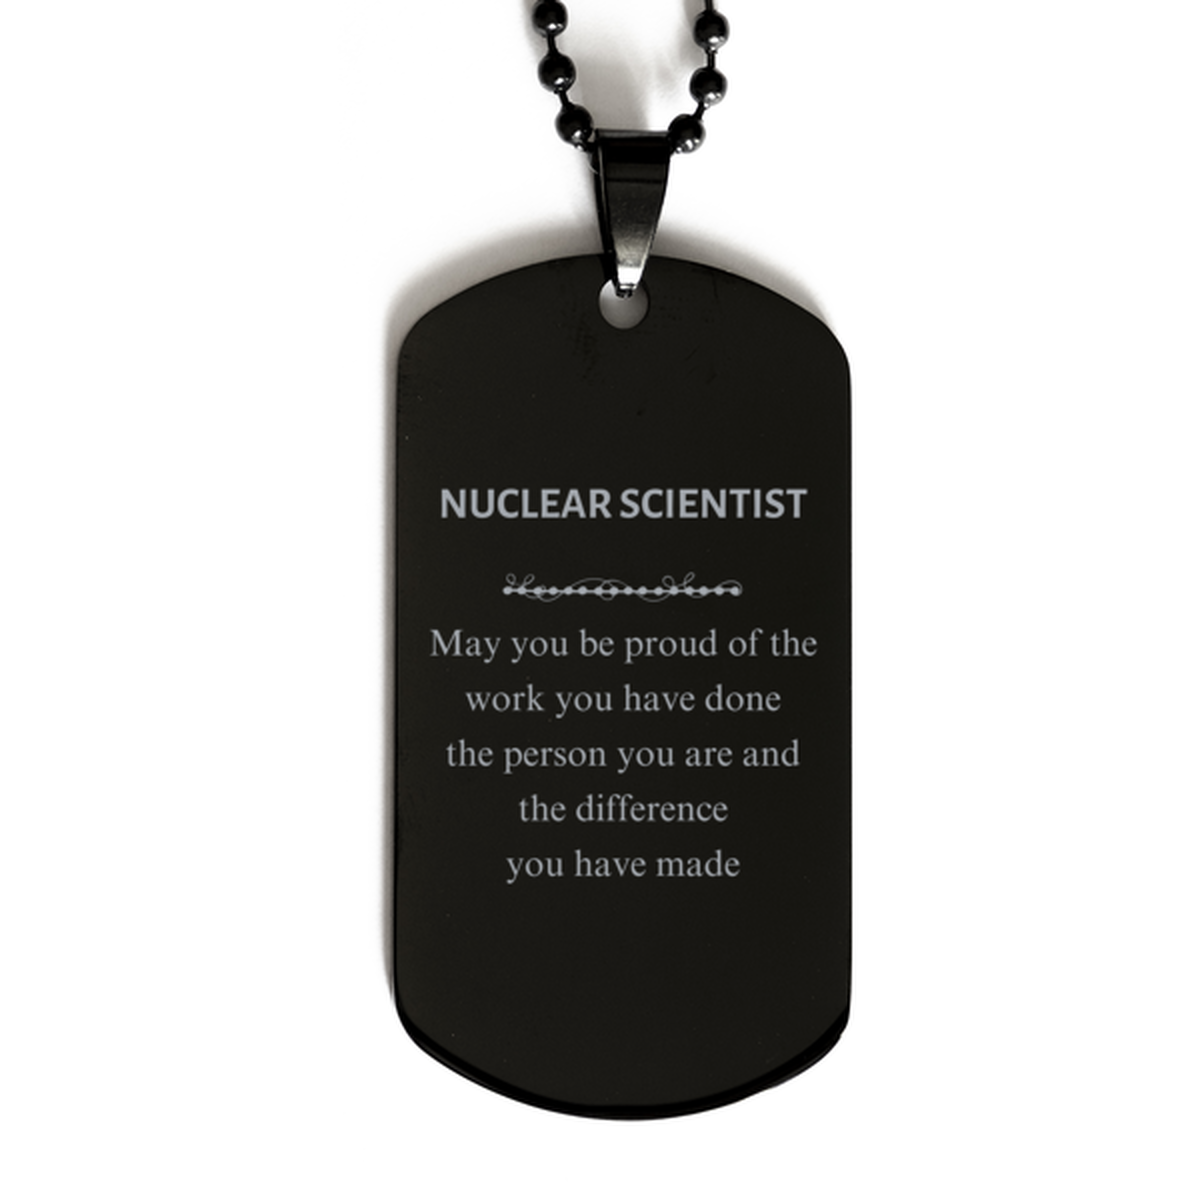 Nuclear Scientist May you be proud of the work you have done, Retirement Nuclear Scientist Black Dog Tag for Colleague Appreciation Gifts Amazing for Nuclear Scientist